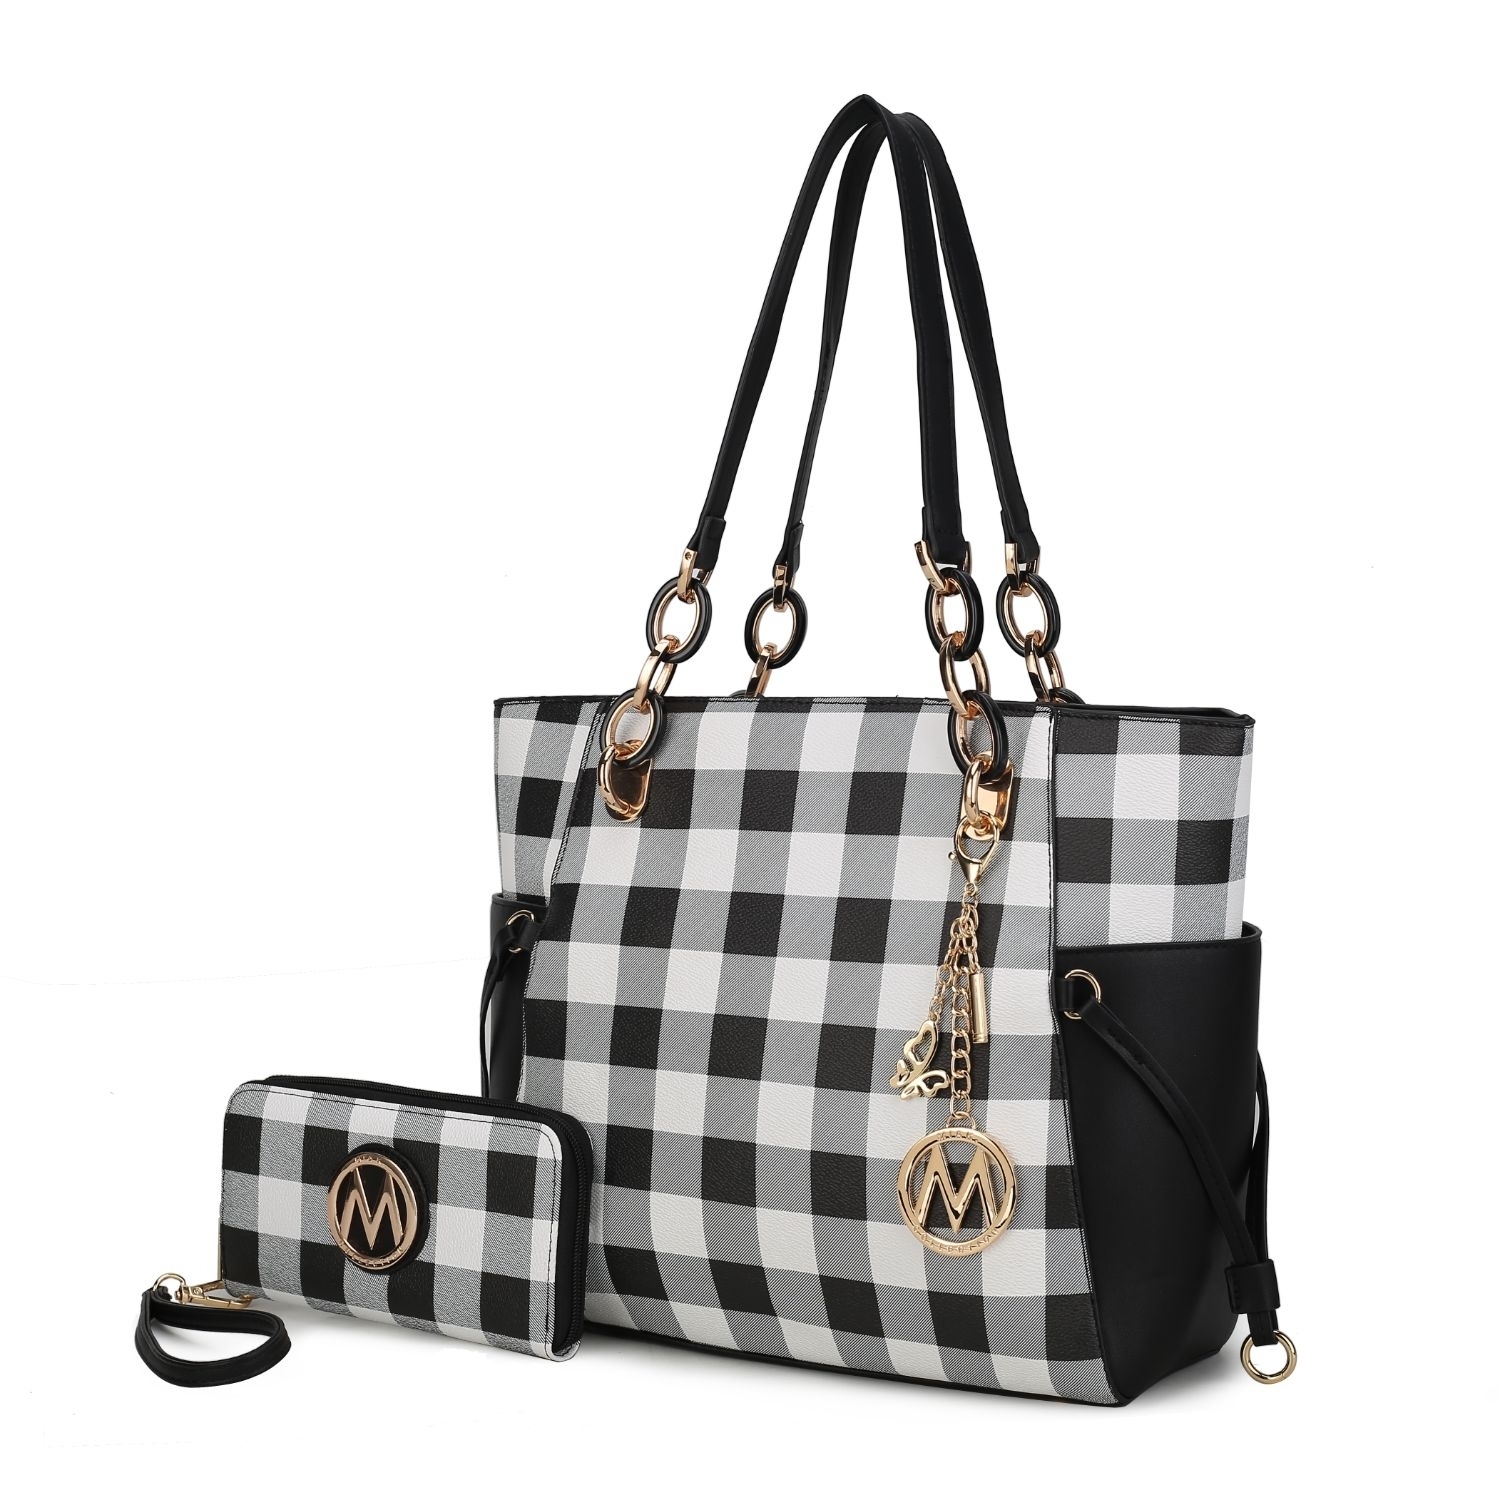 MKF Collection Yale Checkered Tote Handbag With Wallet By Mia K. - Light Blue